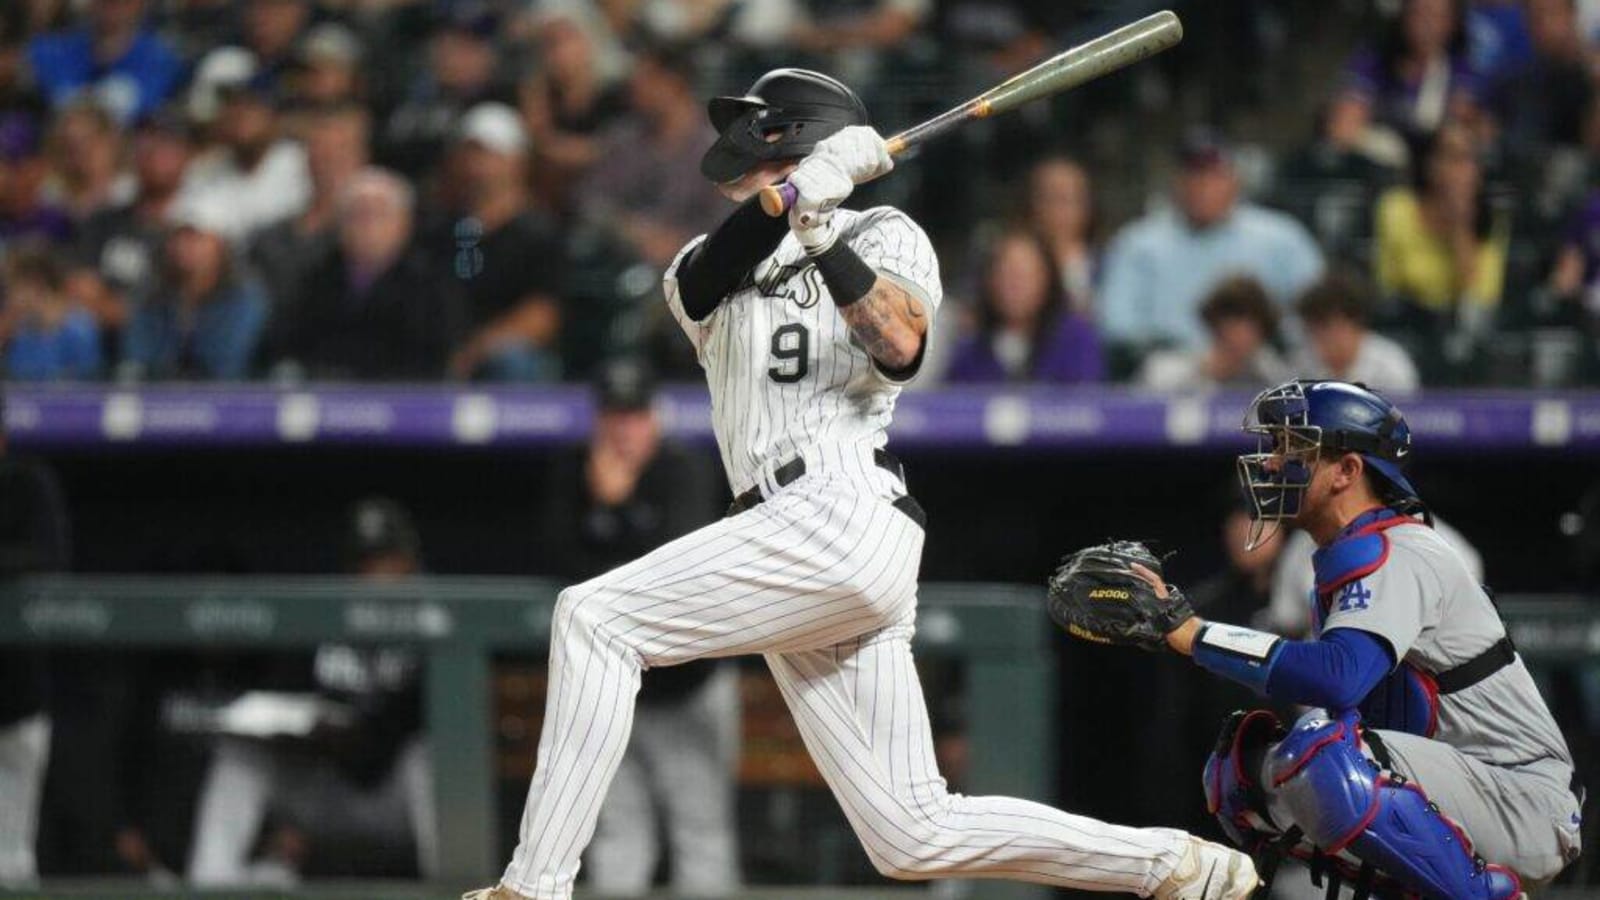 How a Swing Change Can Prime This Rockies Outfielder for a Breakout